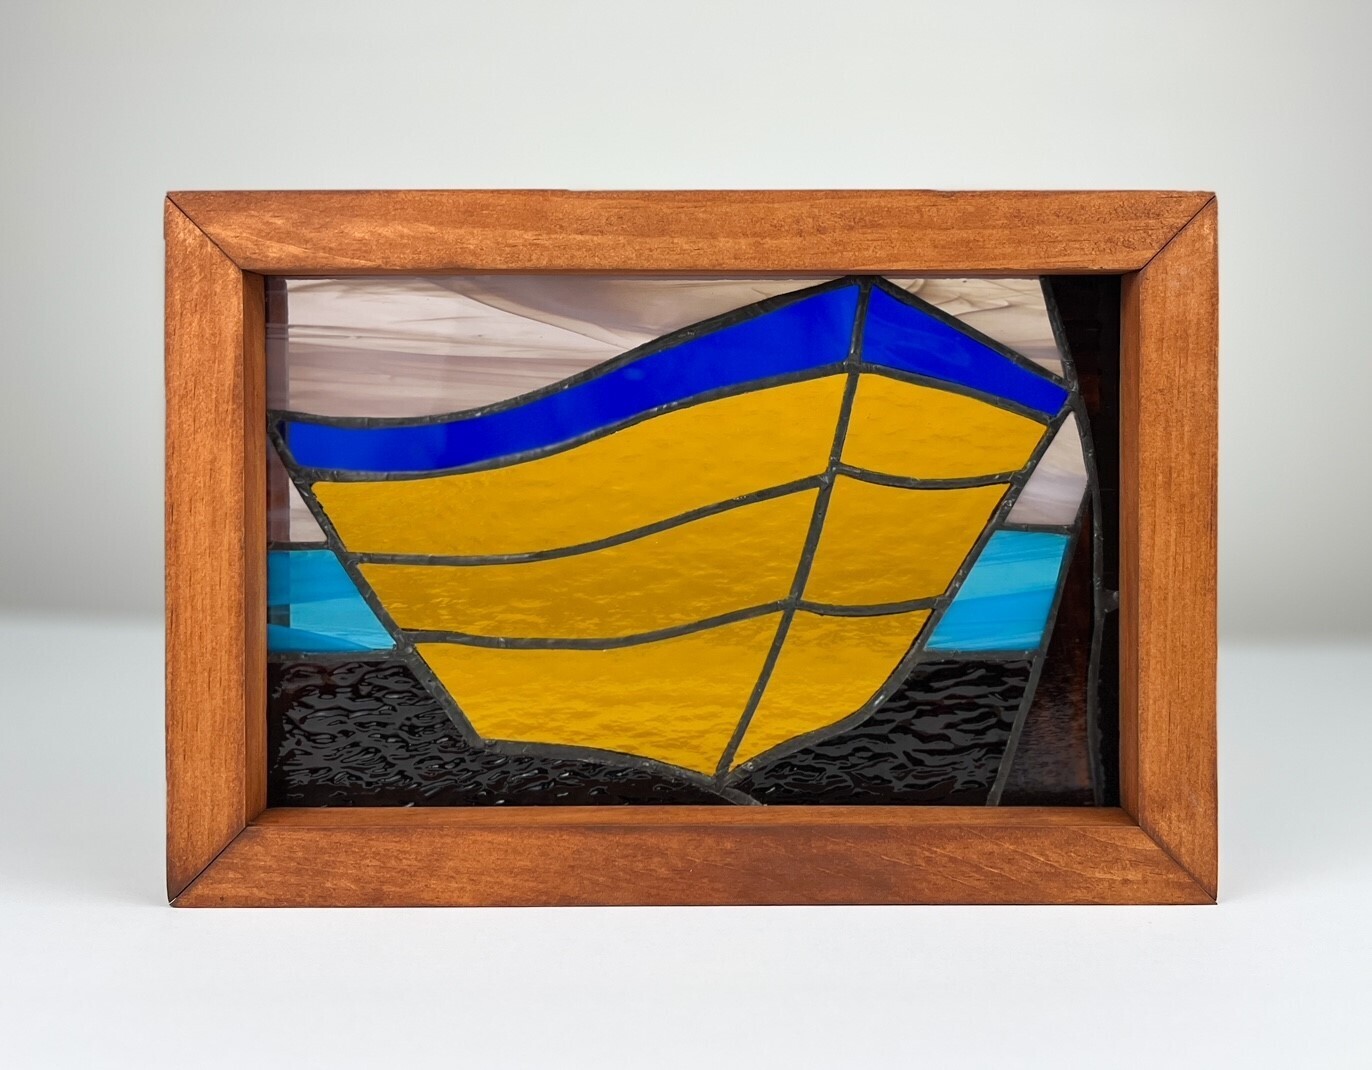 Yellow & Blue Boat Stained Glass Framed 9.75x6.75